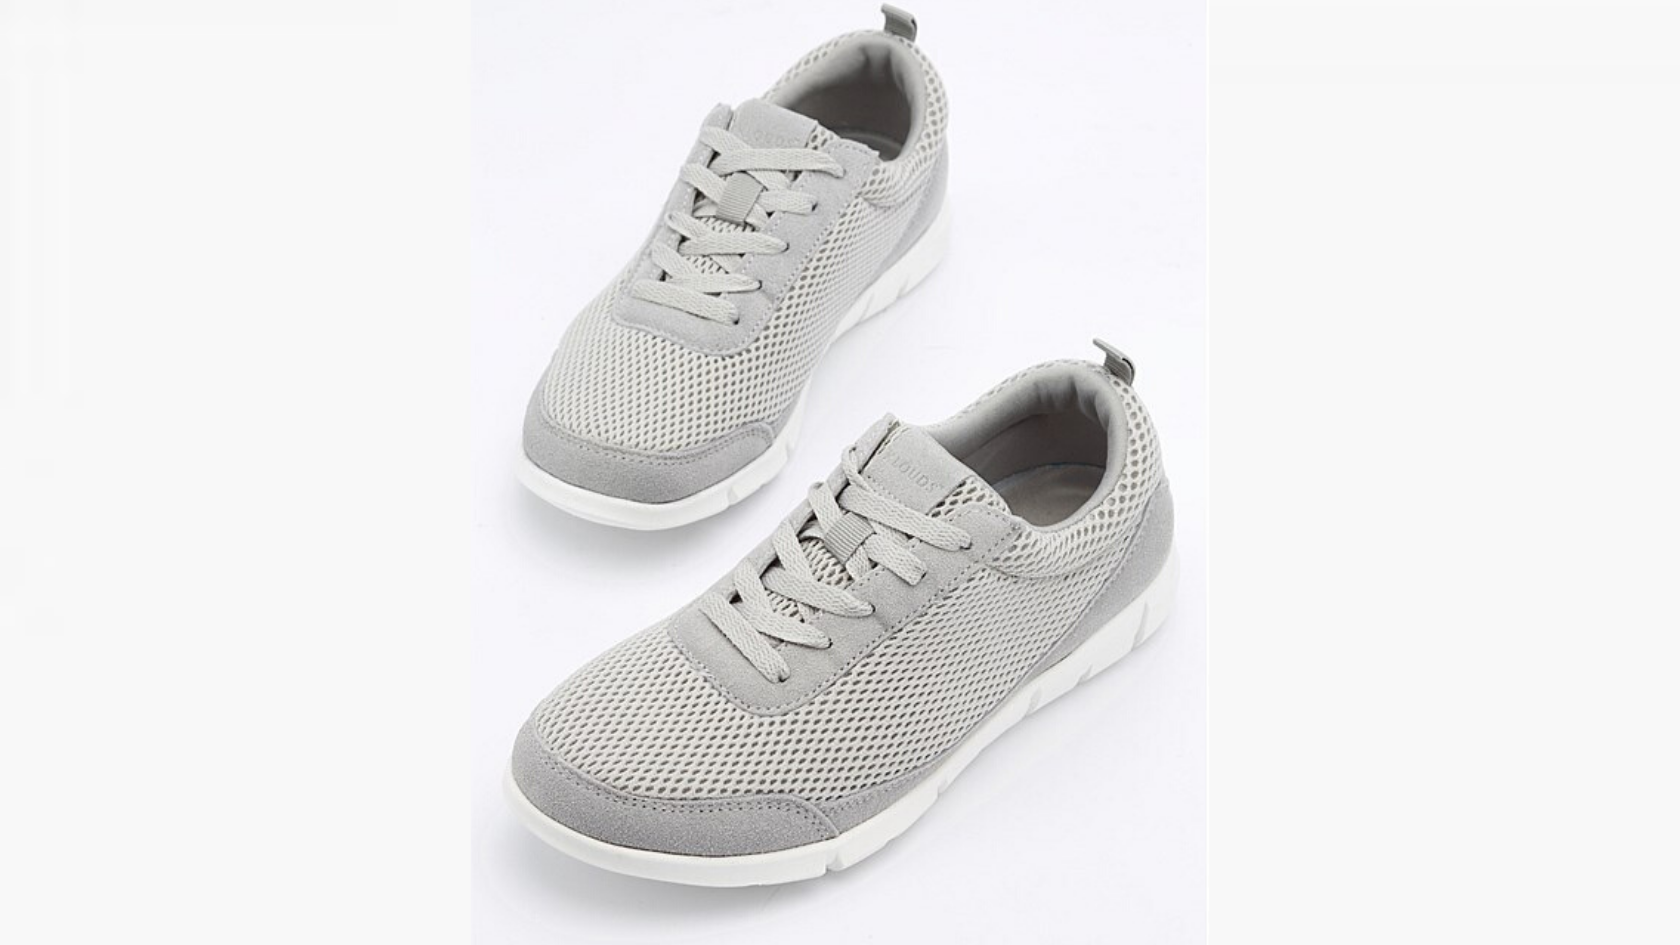 A pair of grey sneakers suspended upon a neutral background